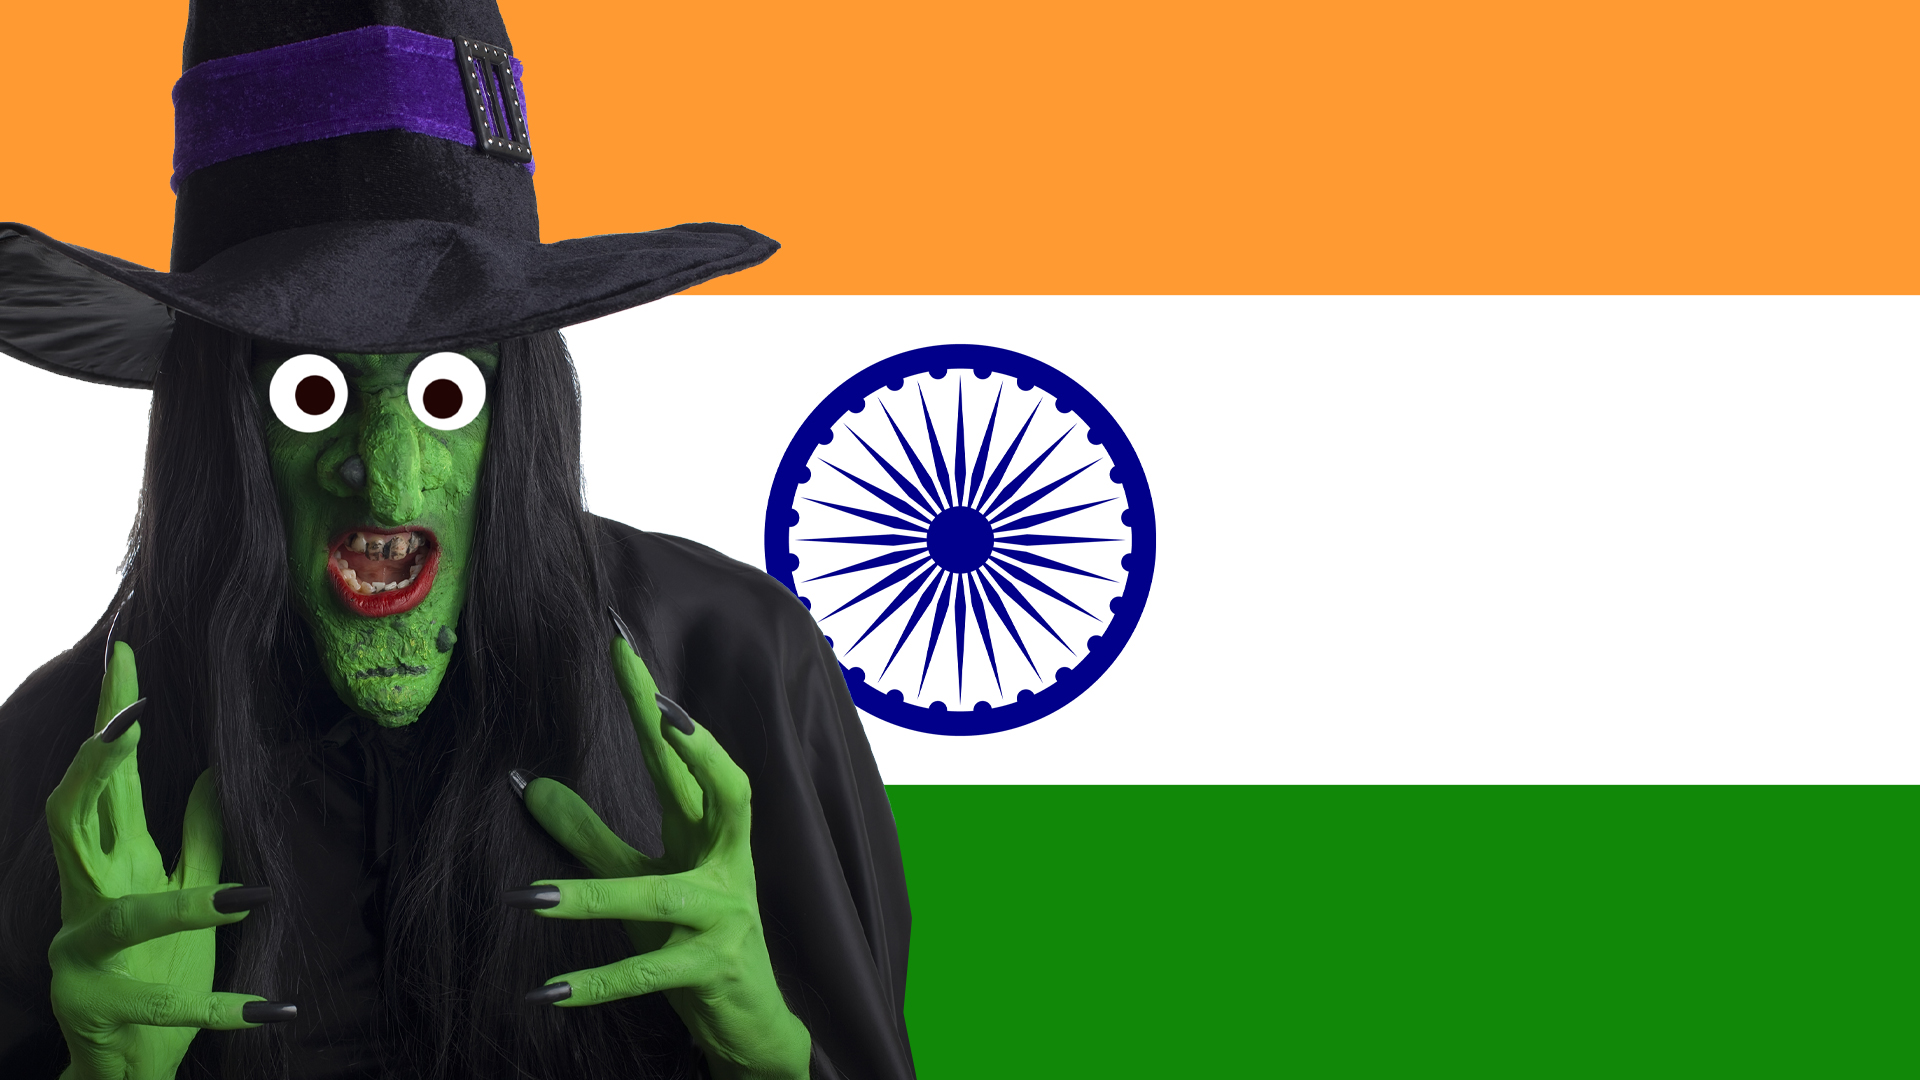 A witch standing in front of an Indian flag